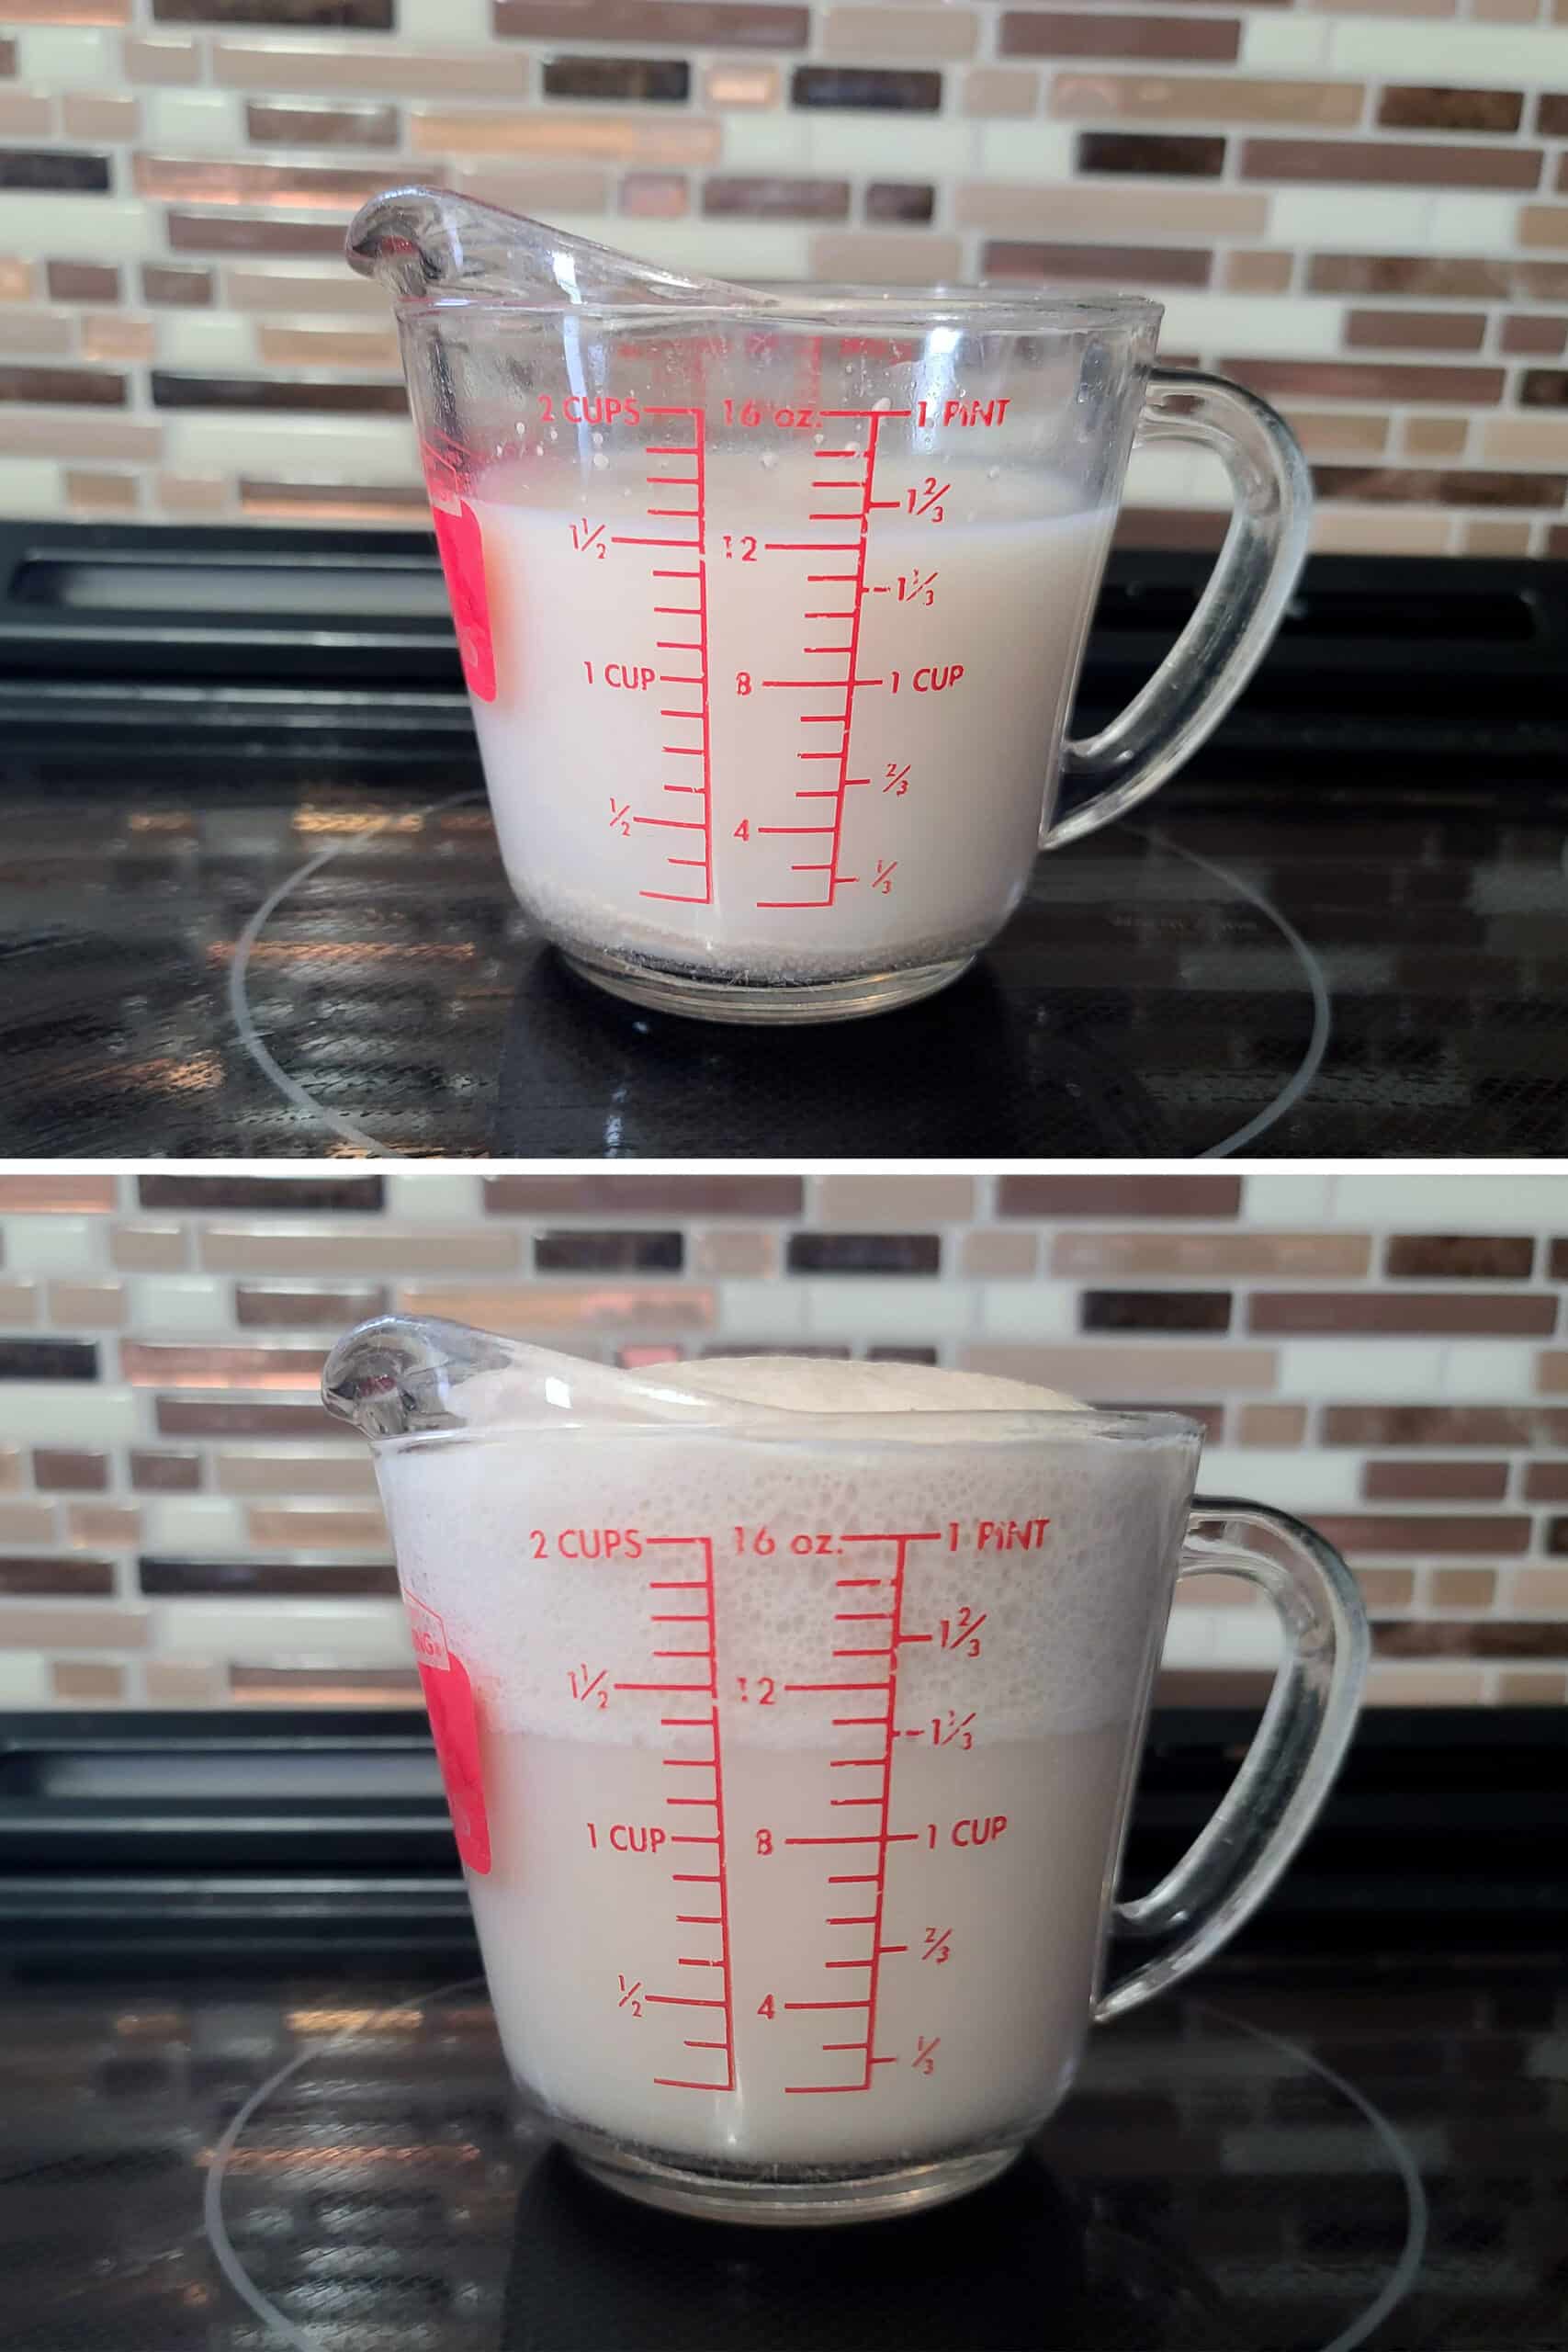 A glass of water and yeast, before and after the yeast bubbled up.